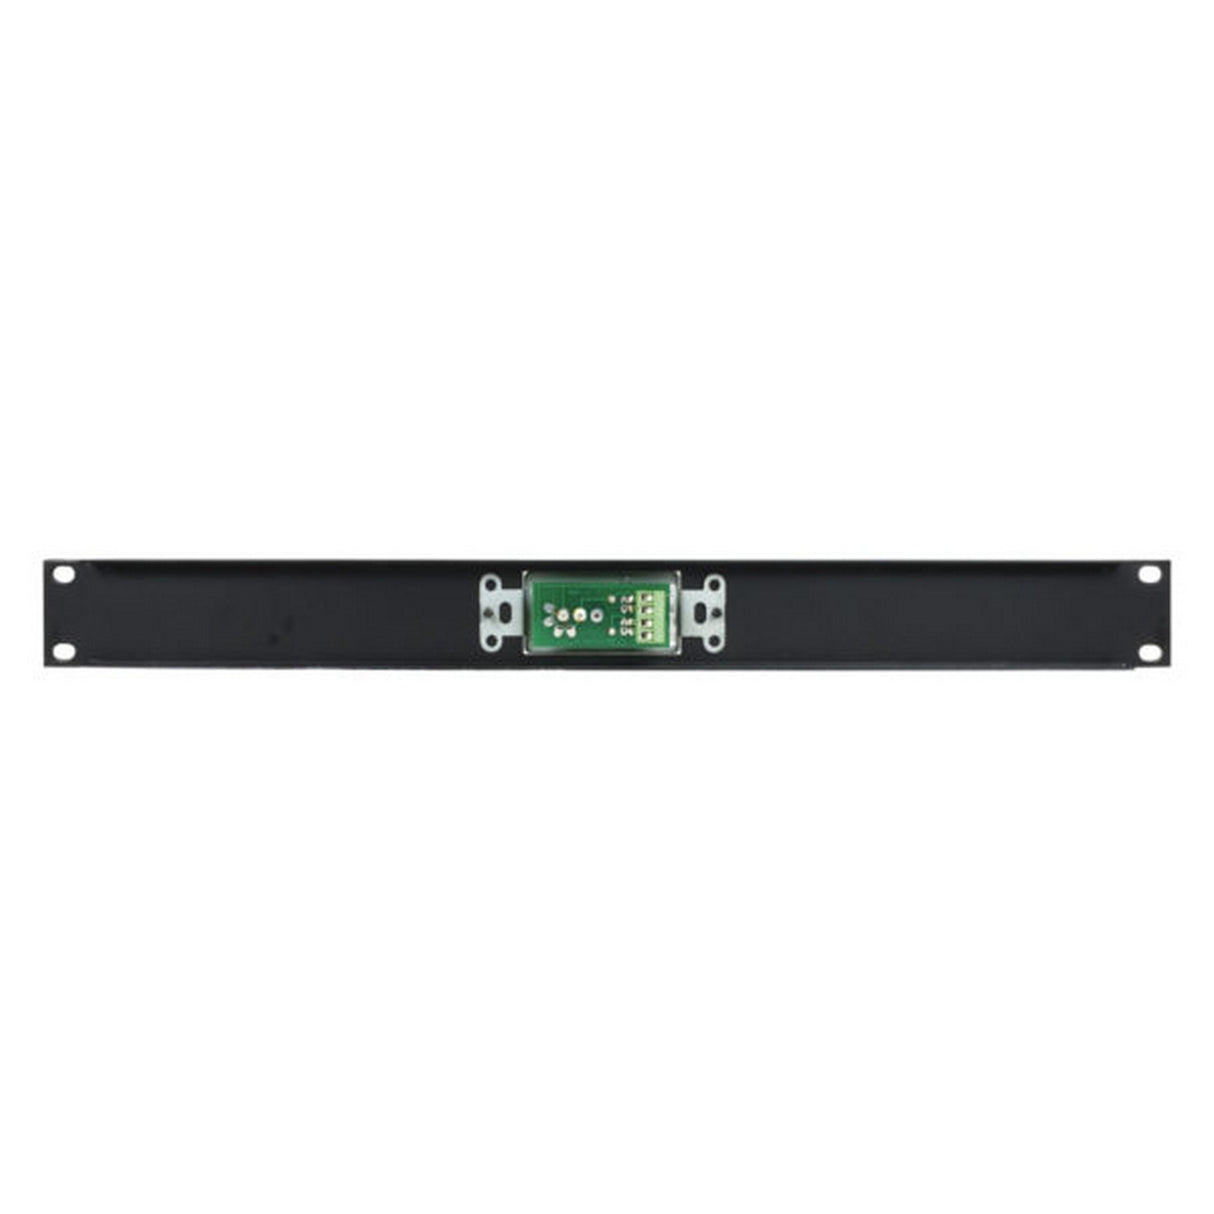 Lowell RPSB2-MR Momentary Single Pole Single Throw Low-Voltage Rackmount Switch